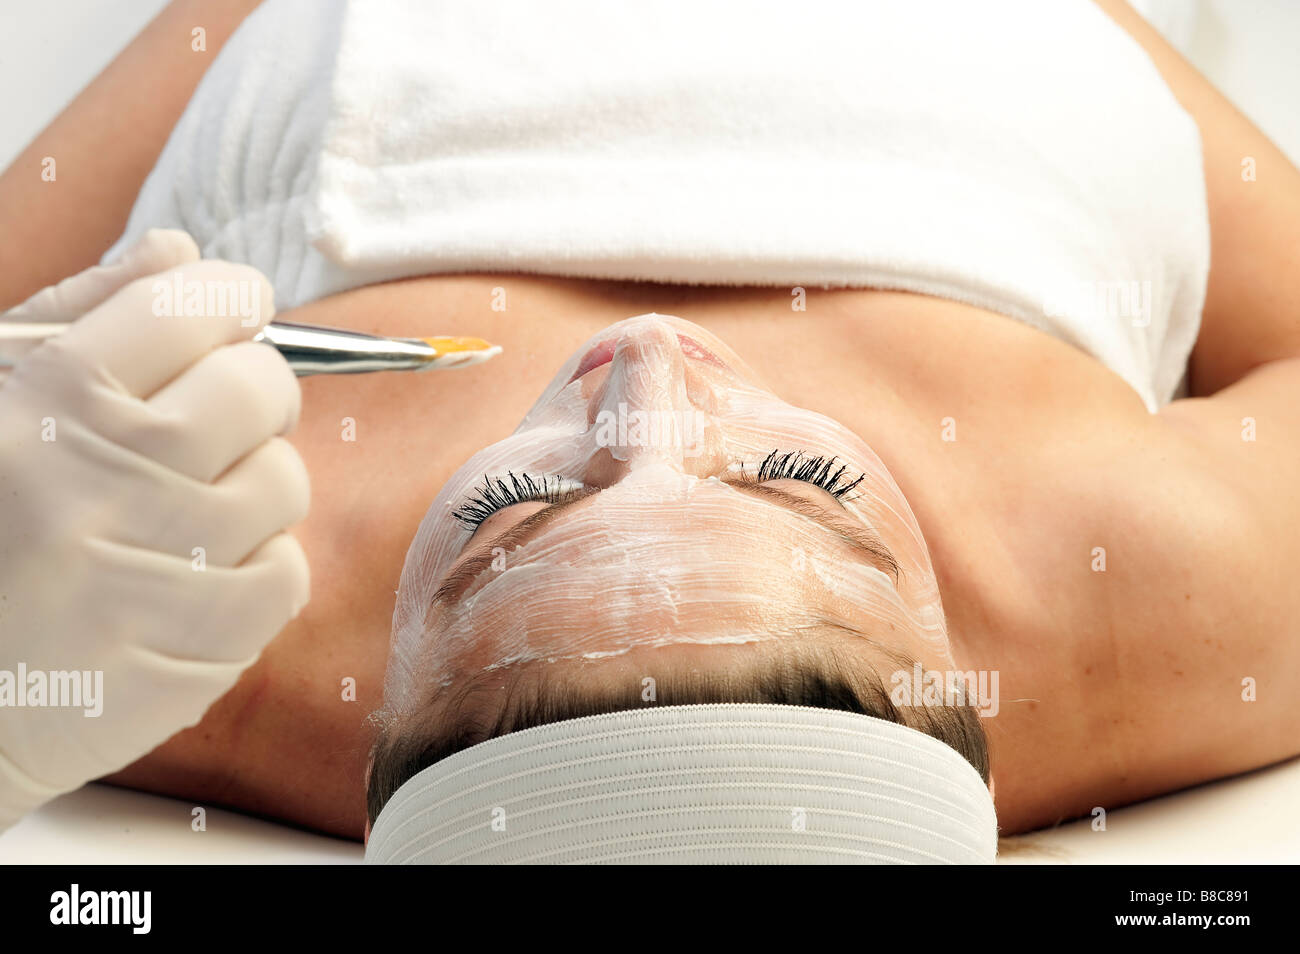 Woman getting a facial treatment at a spa Stock Photo